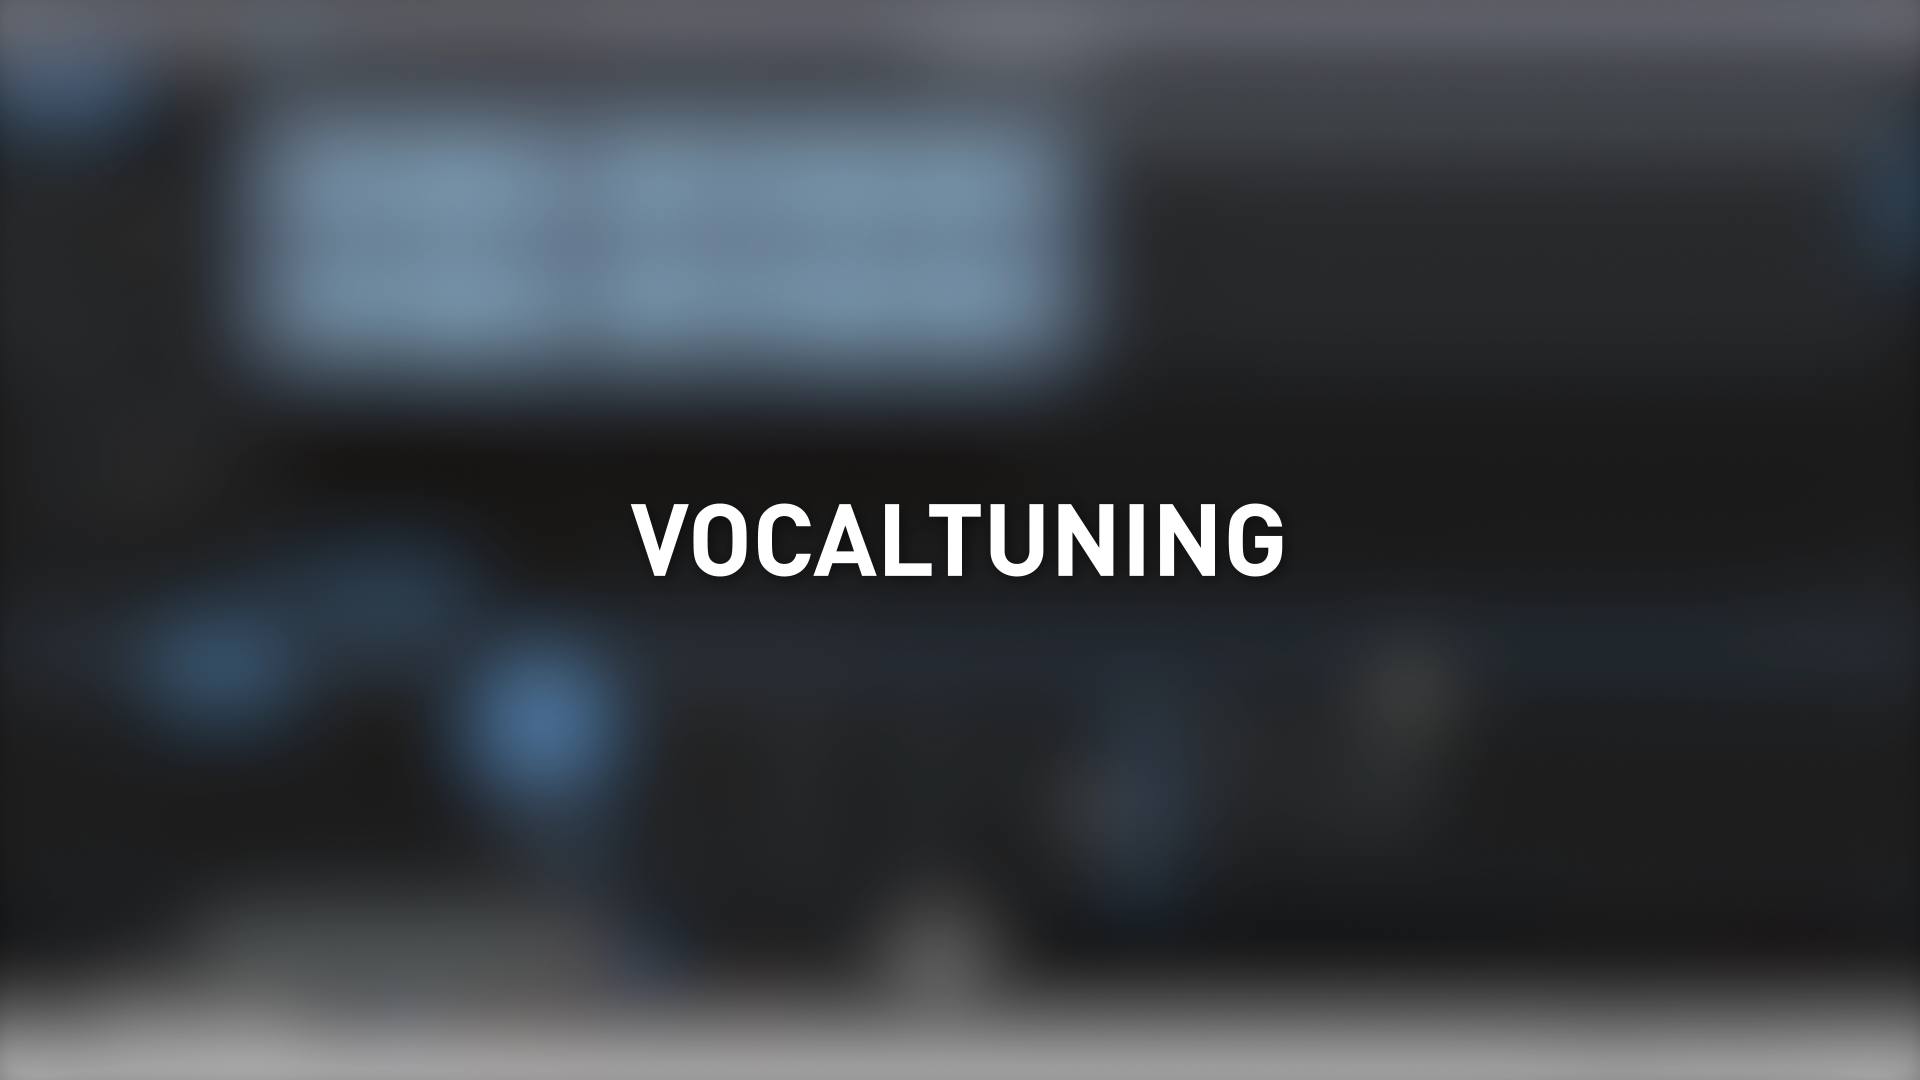 Vocal tuning